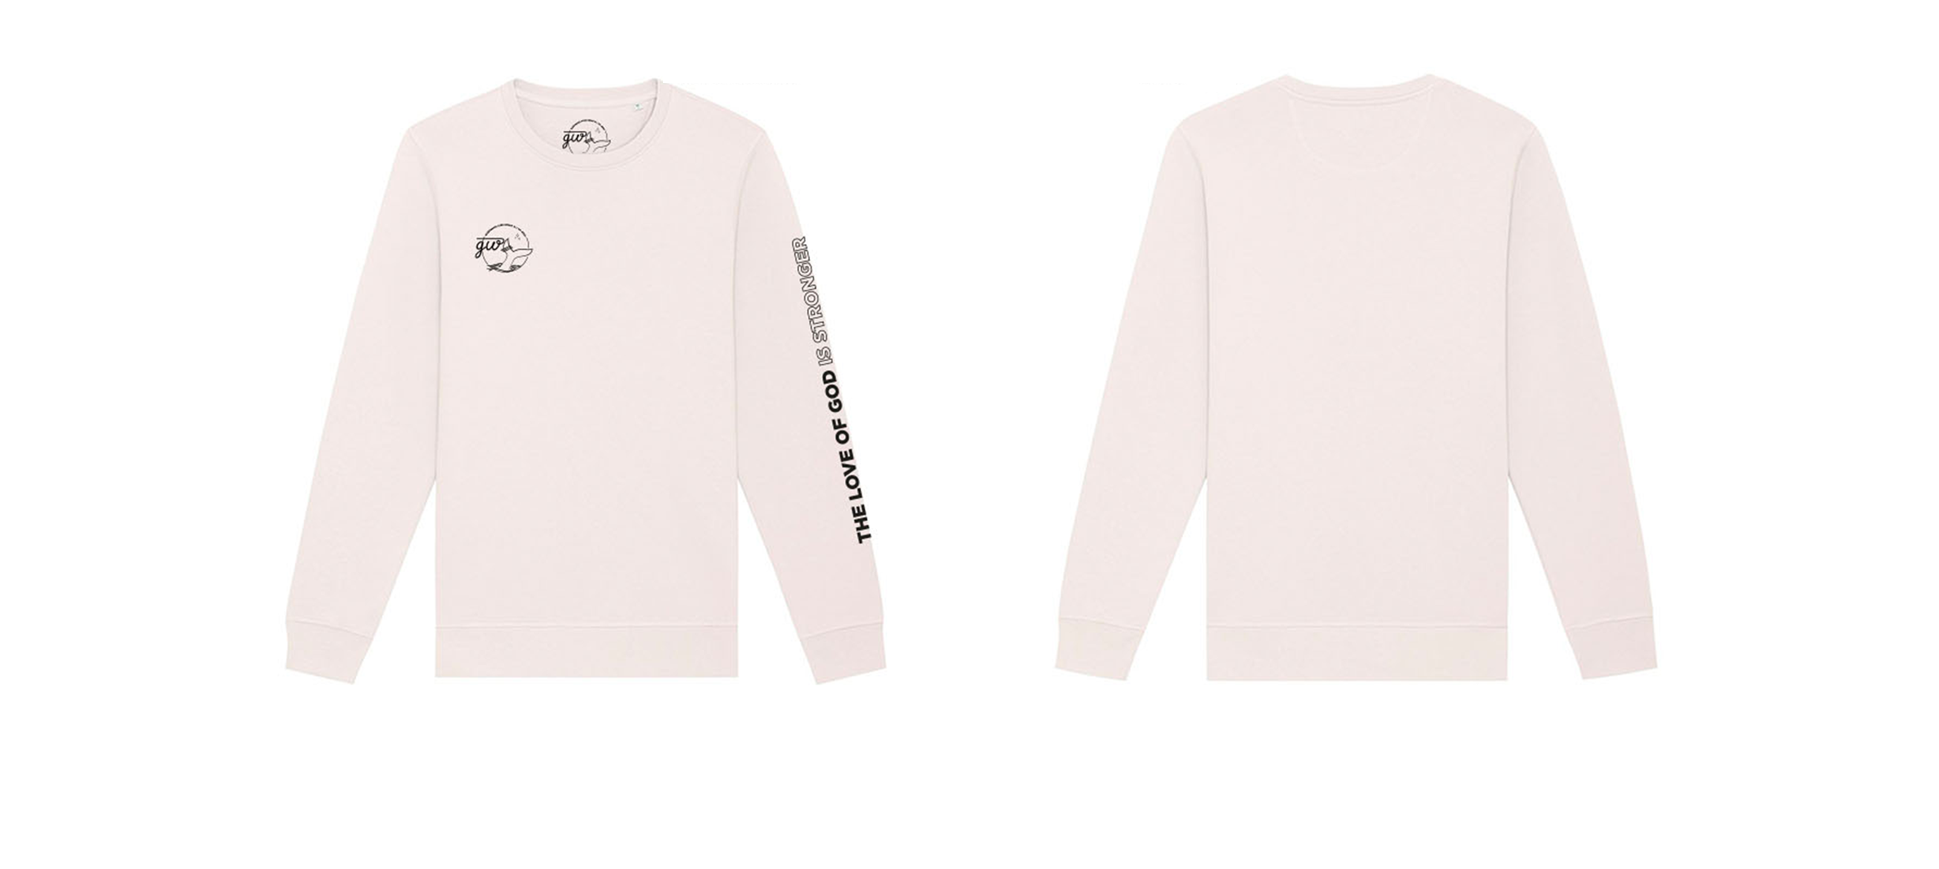 ROLLER 'TLOGIS' Pullover weiss UNISEX